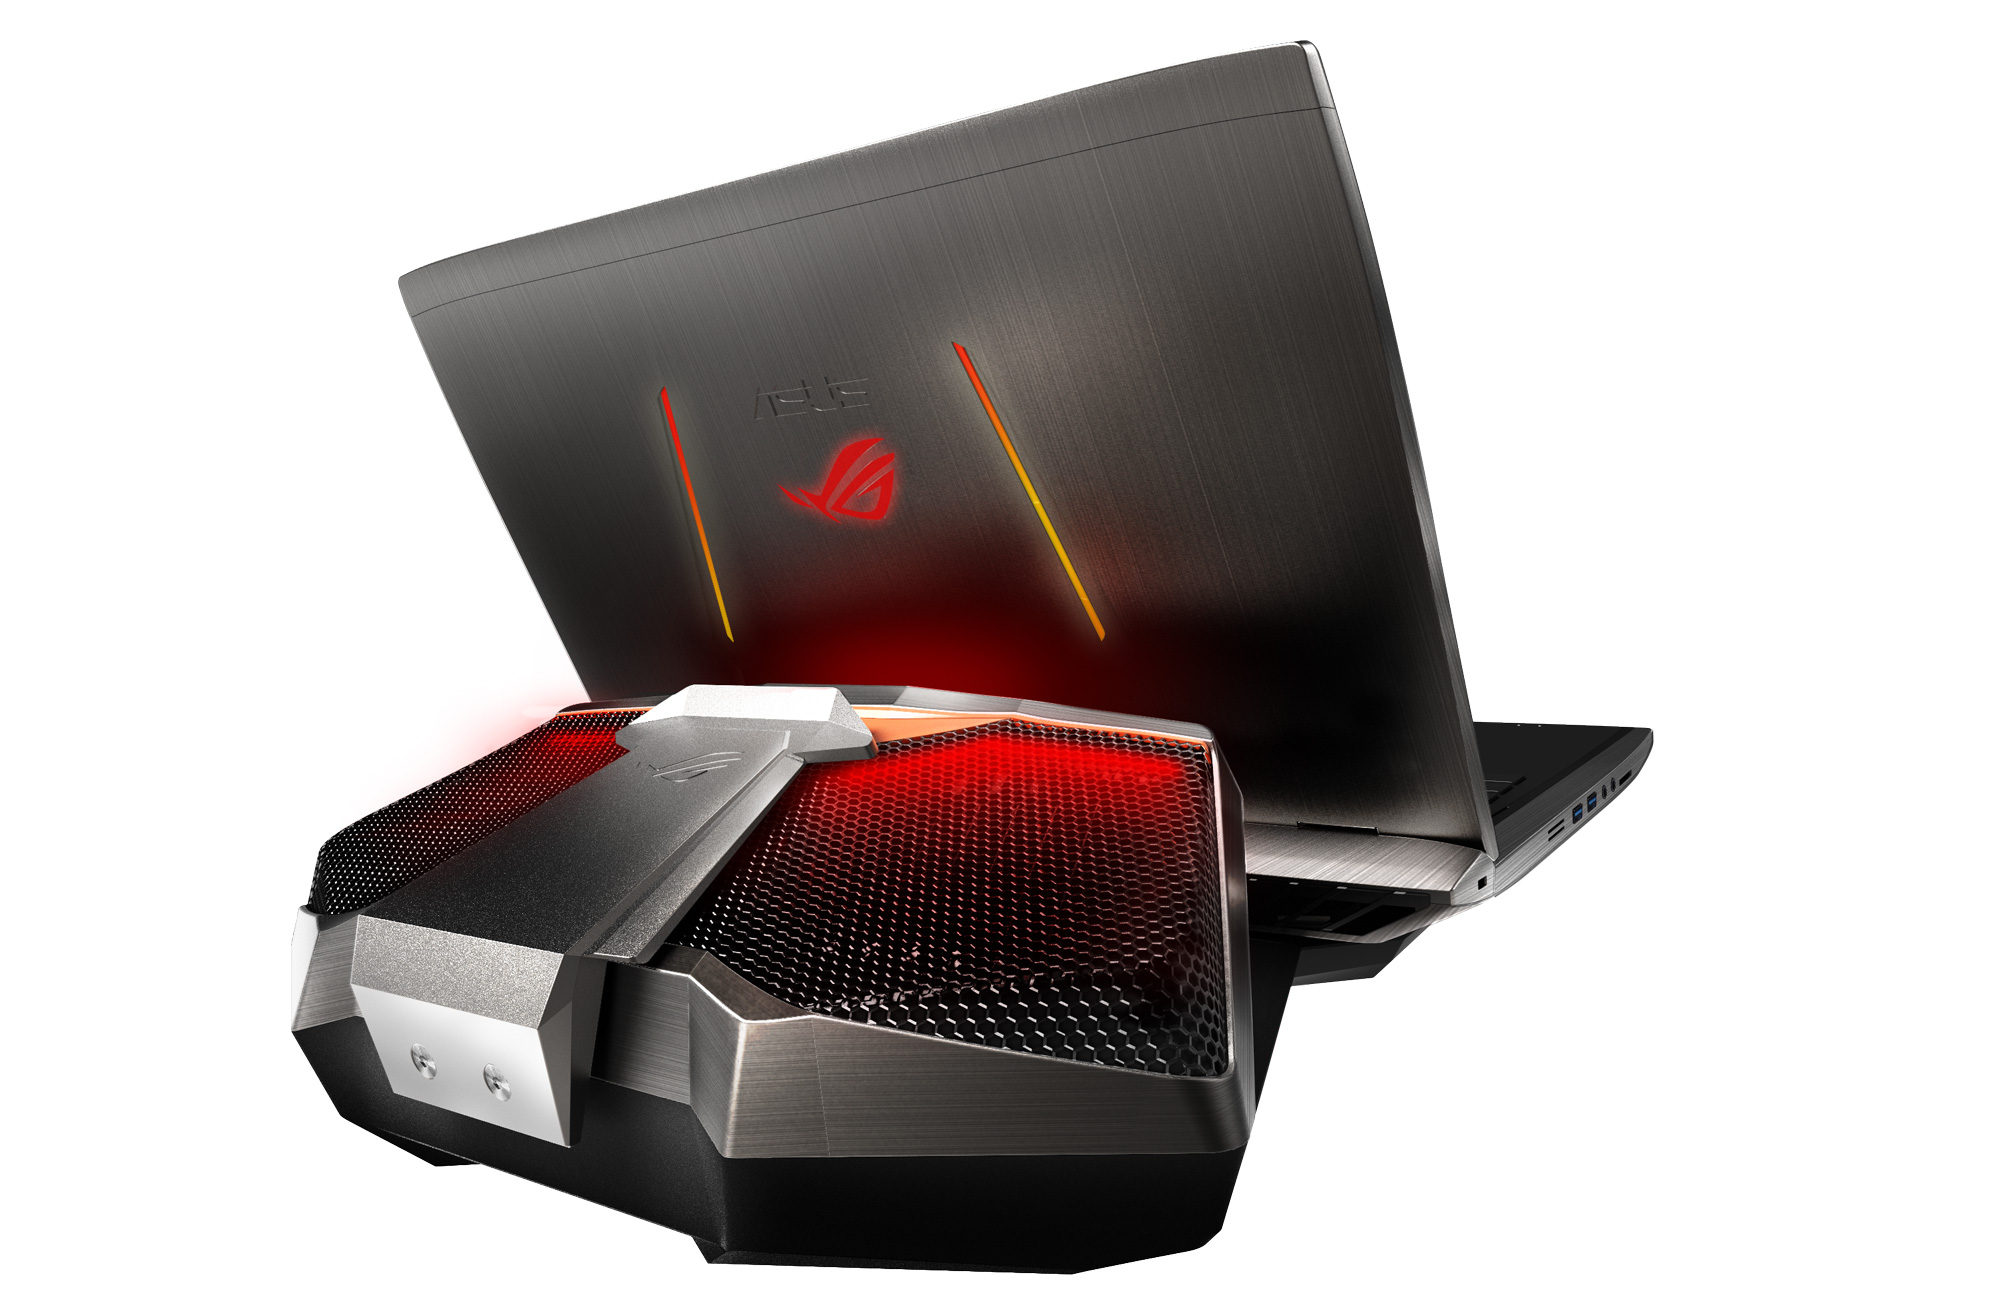 ASUS ROG unveils new lineup at IFA 2015 36